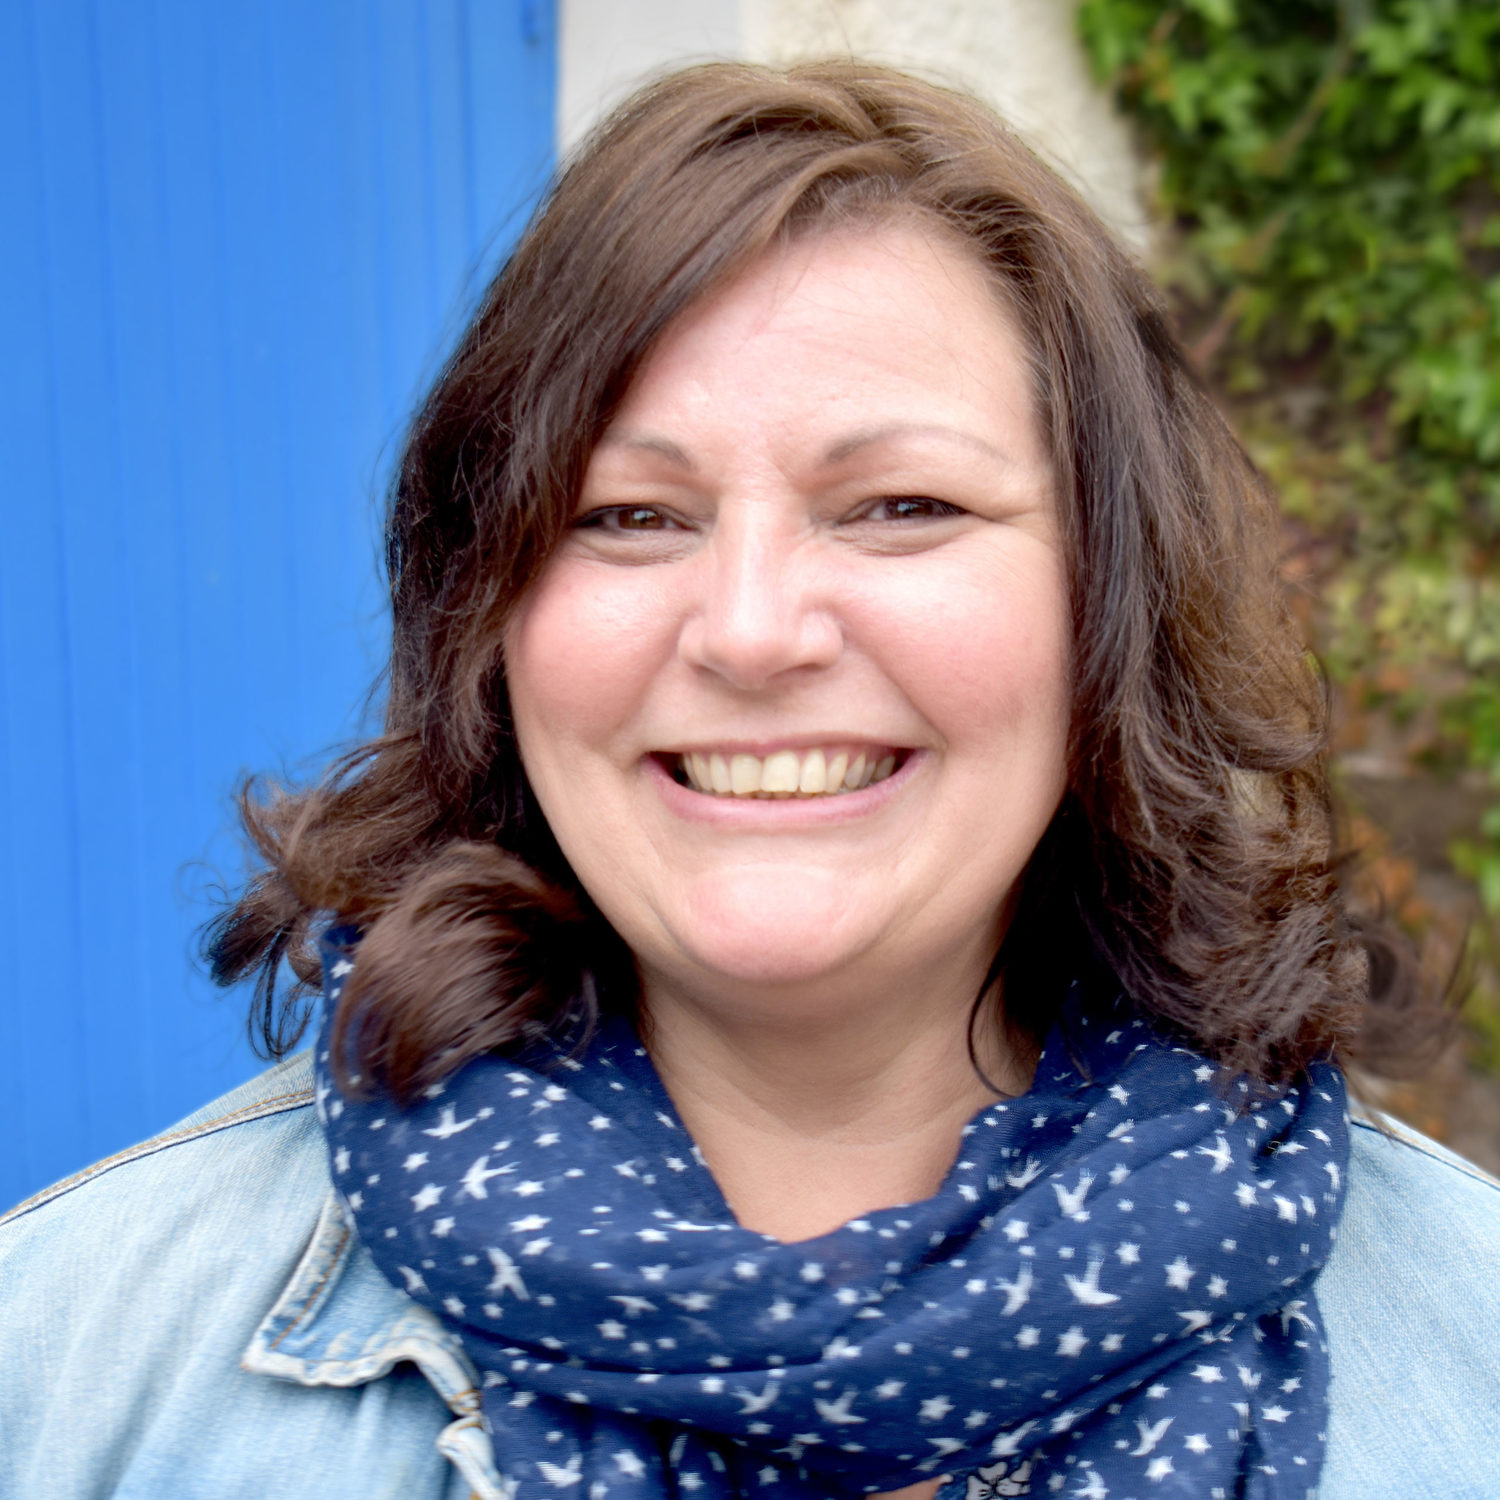 Amanda Hawkins is the Lead Course Tutor for catering and retail